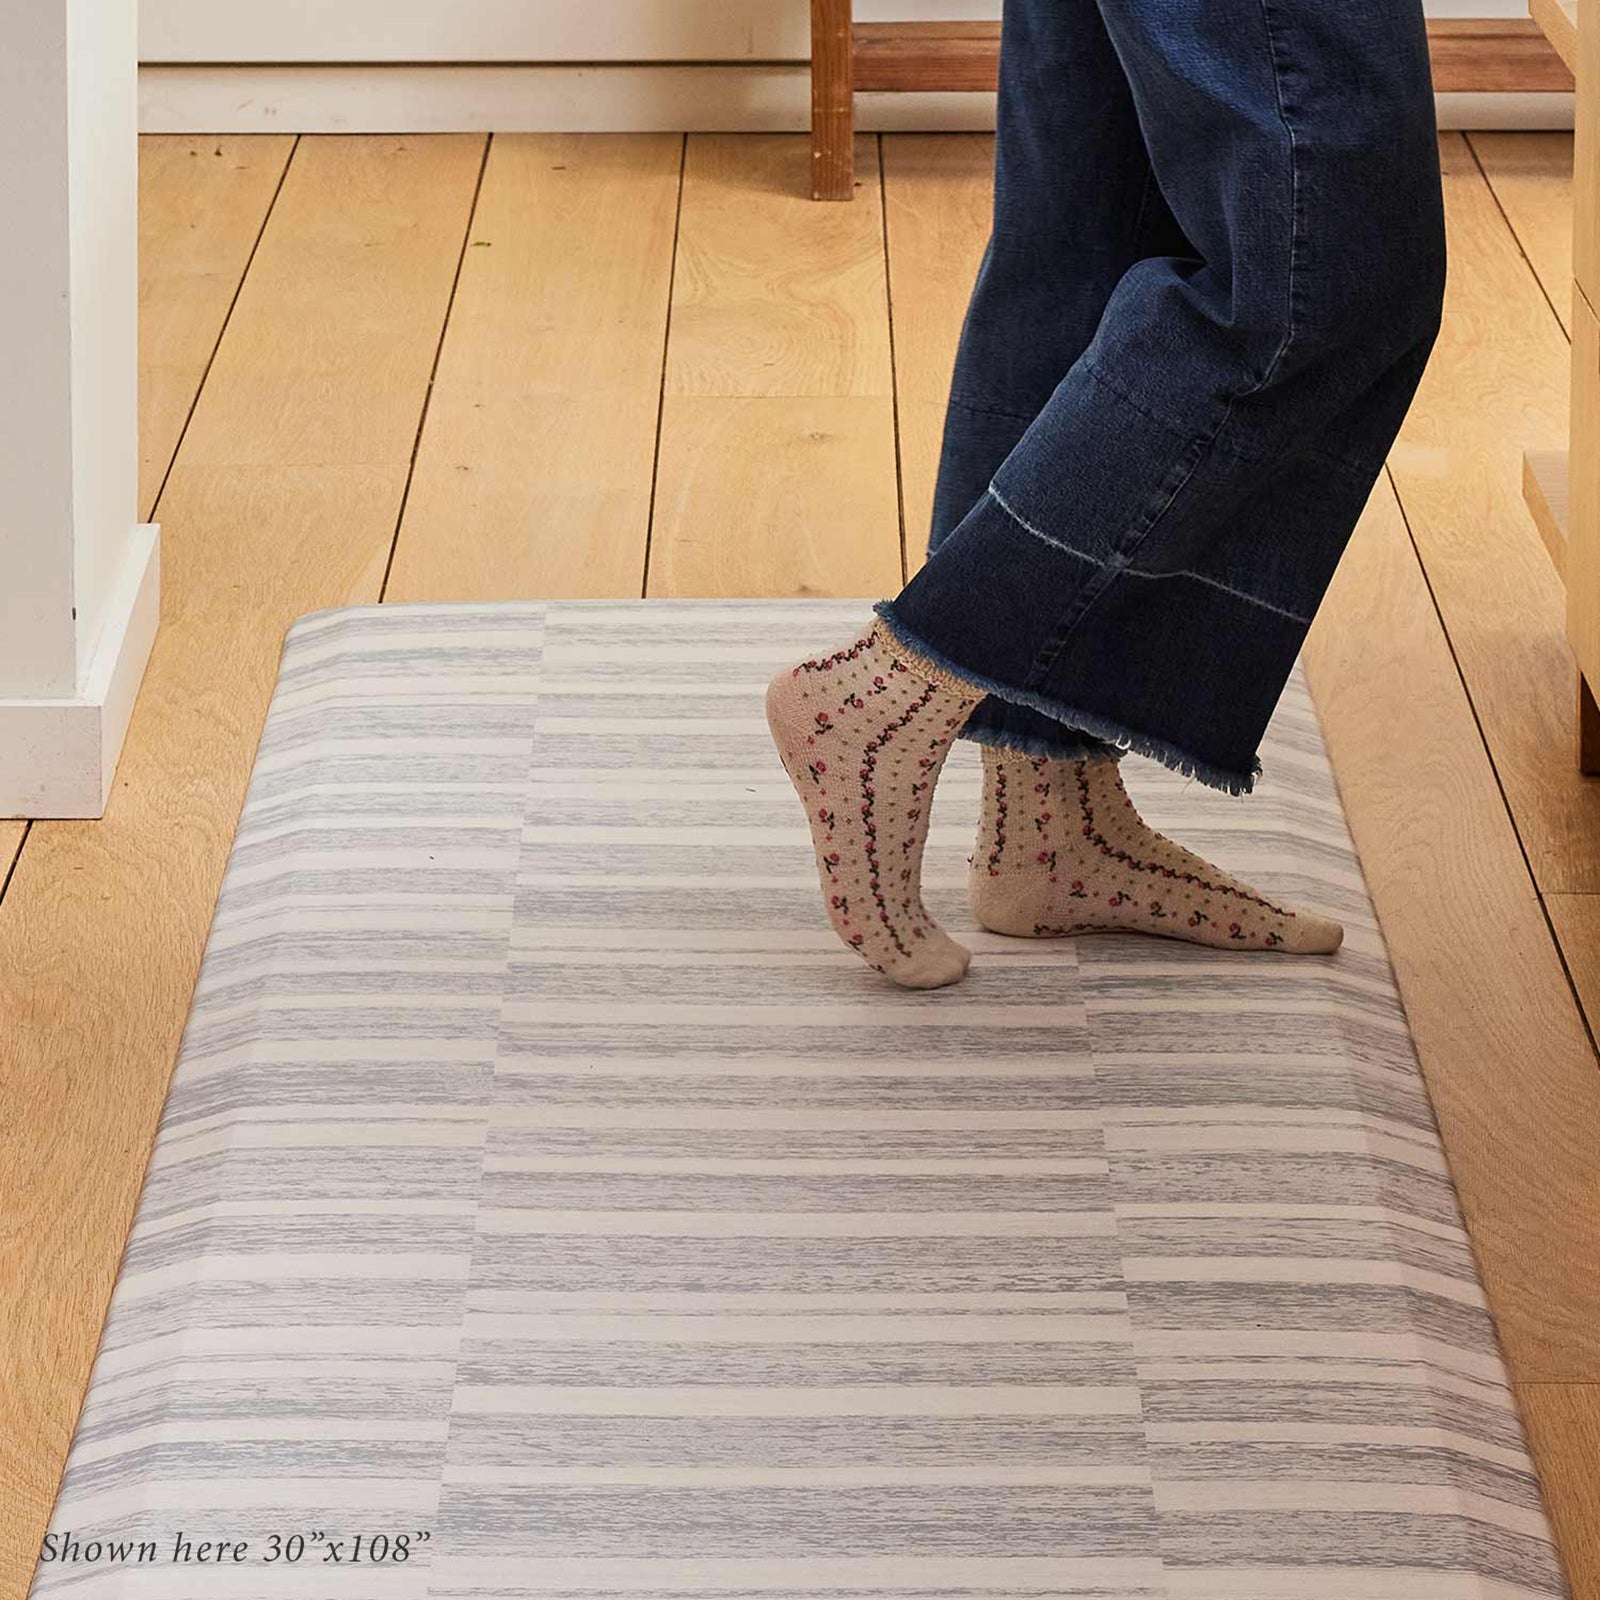 Sutton stripe heather gray and white inverted stripe standing mat shown in size 30x108 cropped to show the feet of a woman standing on the mat wearing floral socks and blue jeans